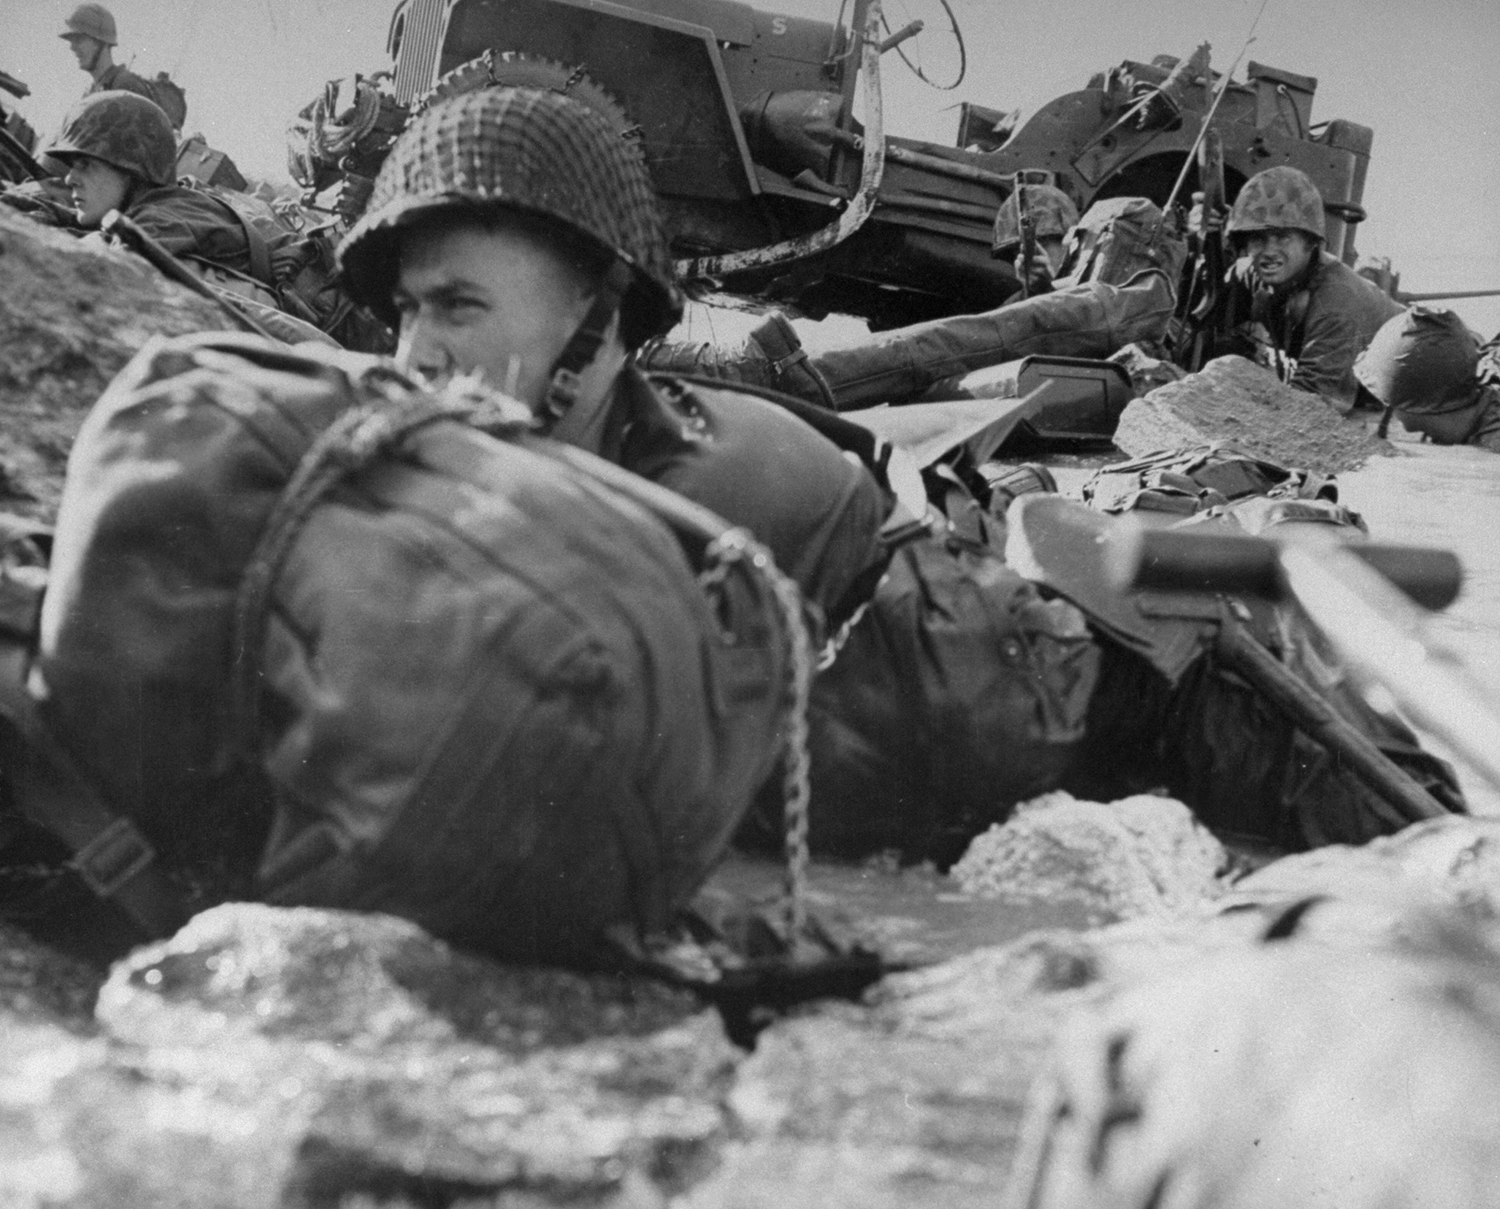 Marines hug sharp coral of beach, with pillbox only 12 yards in front of them. Strock, still lying in the water, has poked camera just over low pile of coral. Men finally edged back into the surf and moved cautiously down beach to flank pillbox. Marine in the background at upper left shows dangerous curiosity.